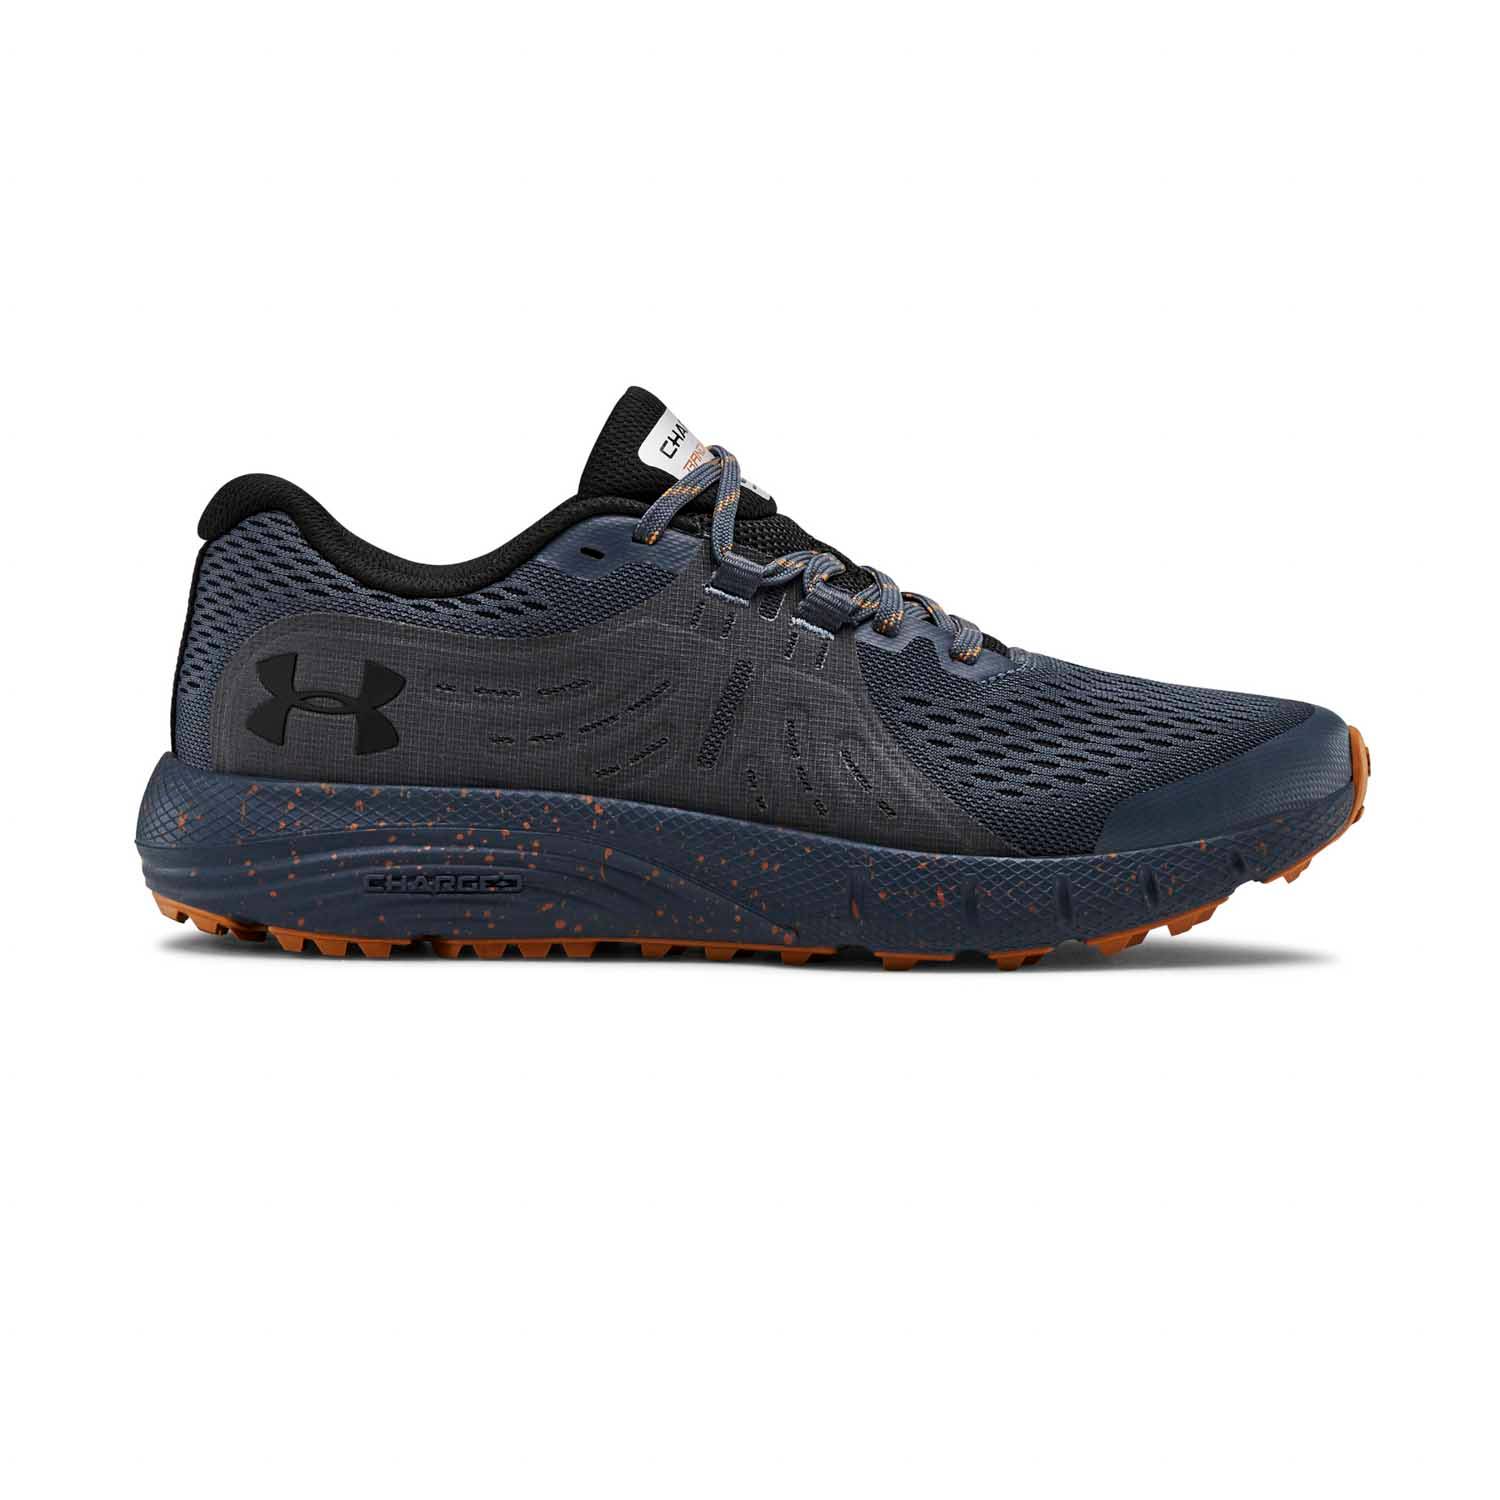 Under Armour Charged Bandit Trail 